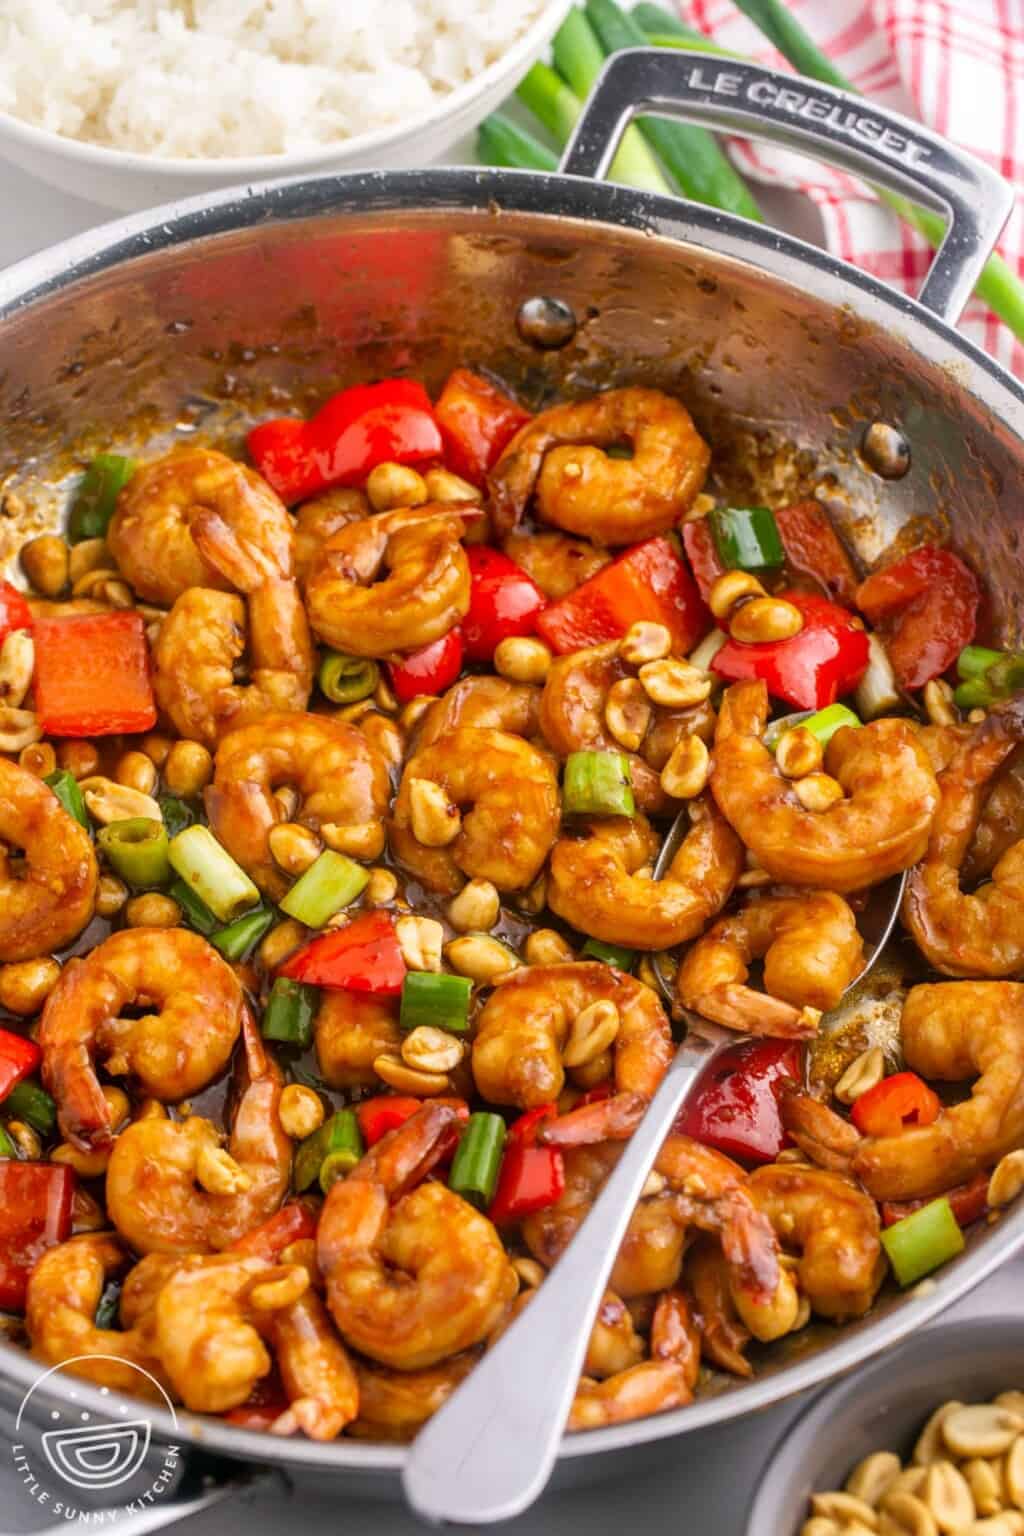 Kung pao shrimp in a skillet with a serving spoon.
